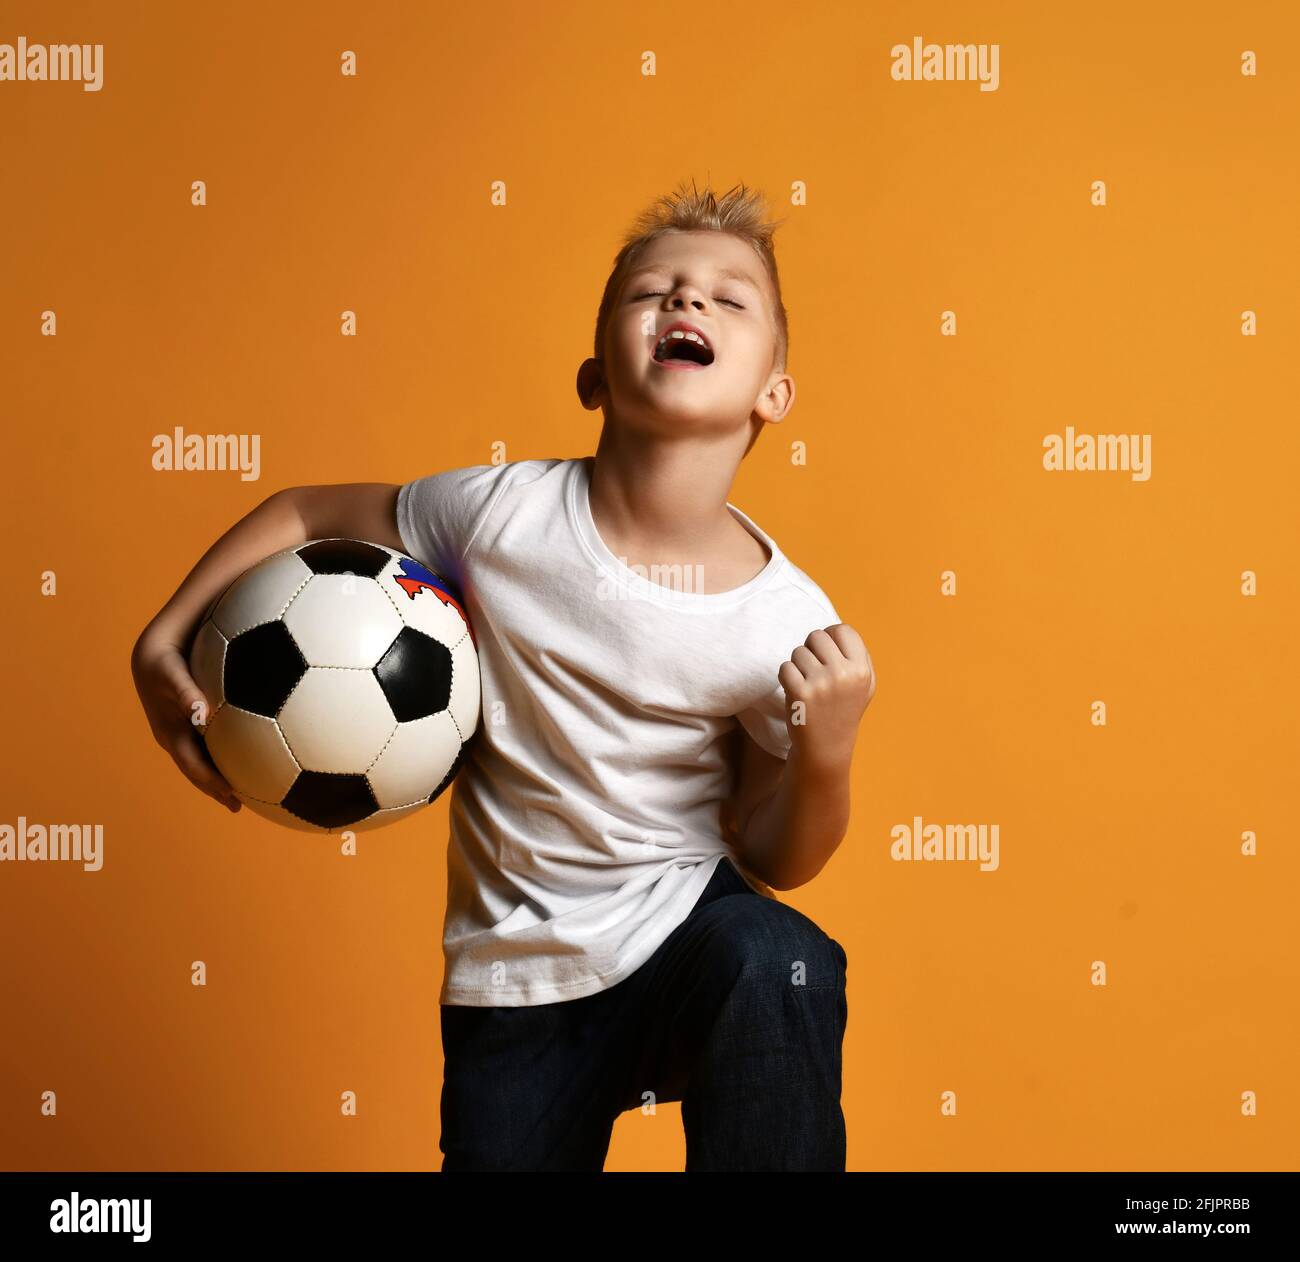 Happy schoolboy in white blank t-shirt and jeans stands holding soccer ball in hand and celebrates Goal Stock Photo